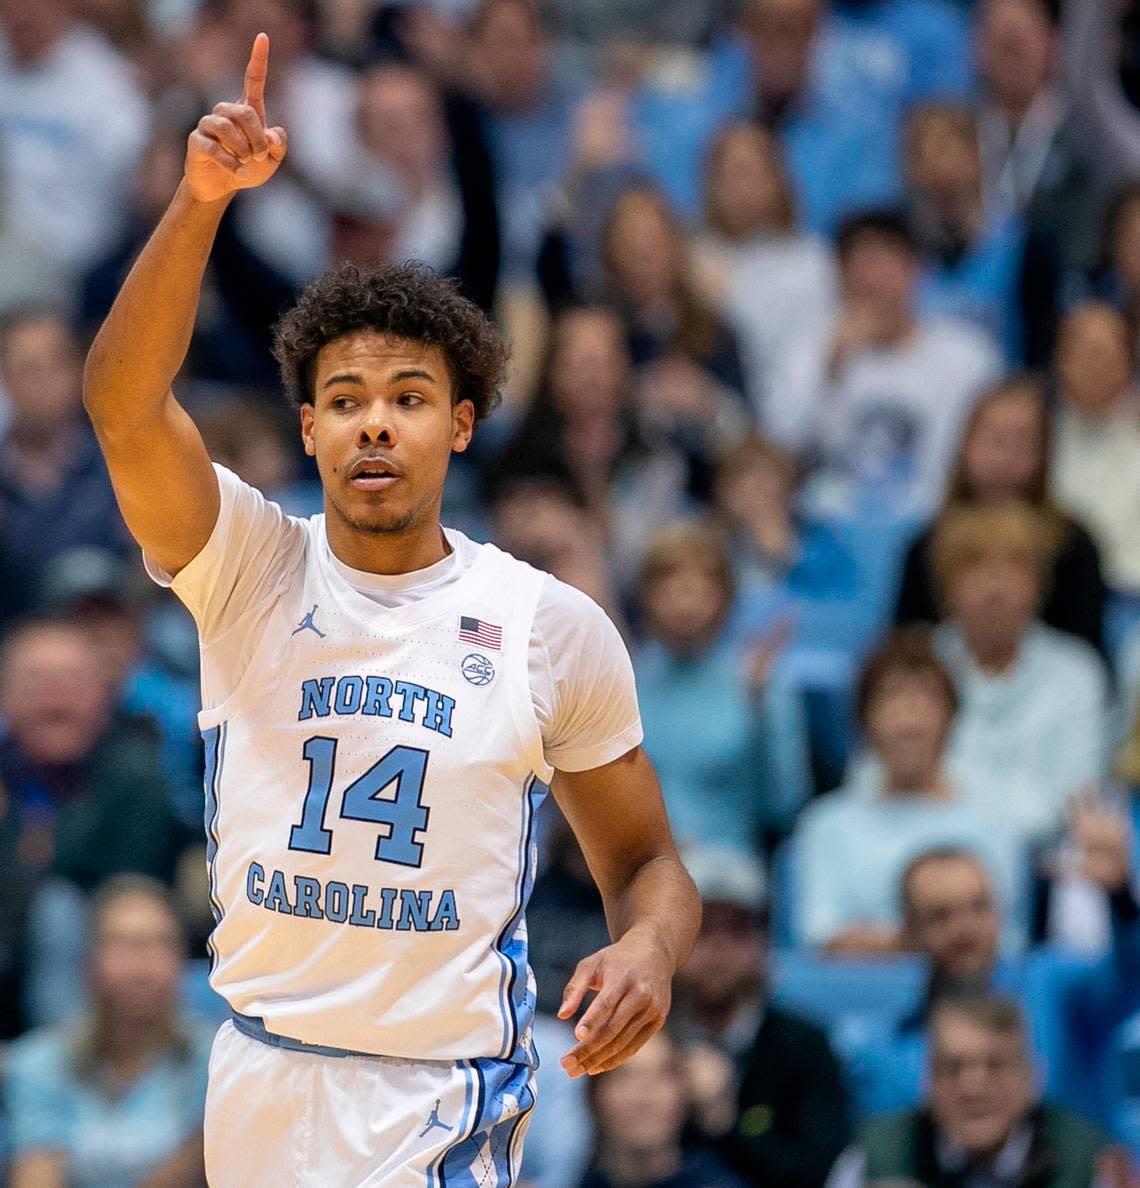 North Carolina’s Puff Johnson (14) reacts after a basket in the second half against Clemson on Saturday, February 11, 2023 at the Smith Center in Chapel Hill, N.C. Johnson scored eight points.